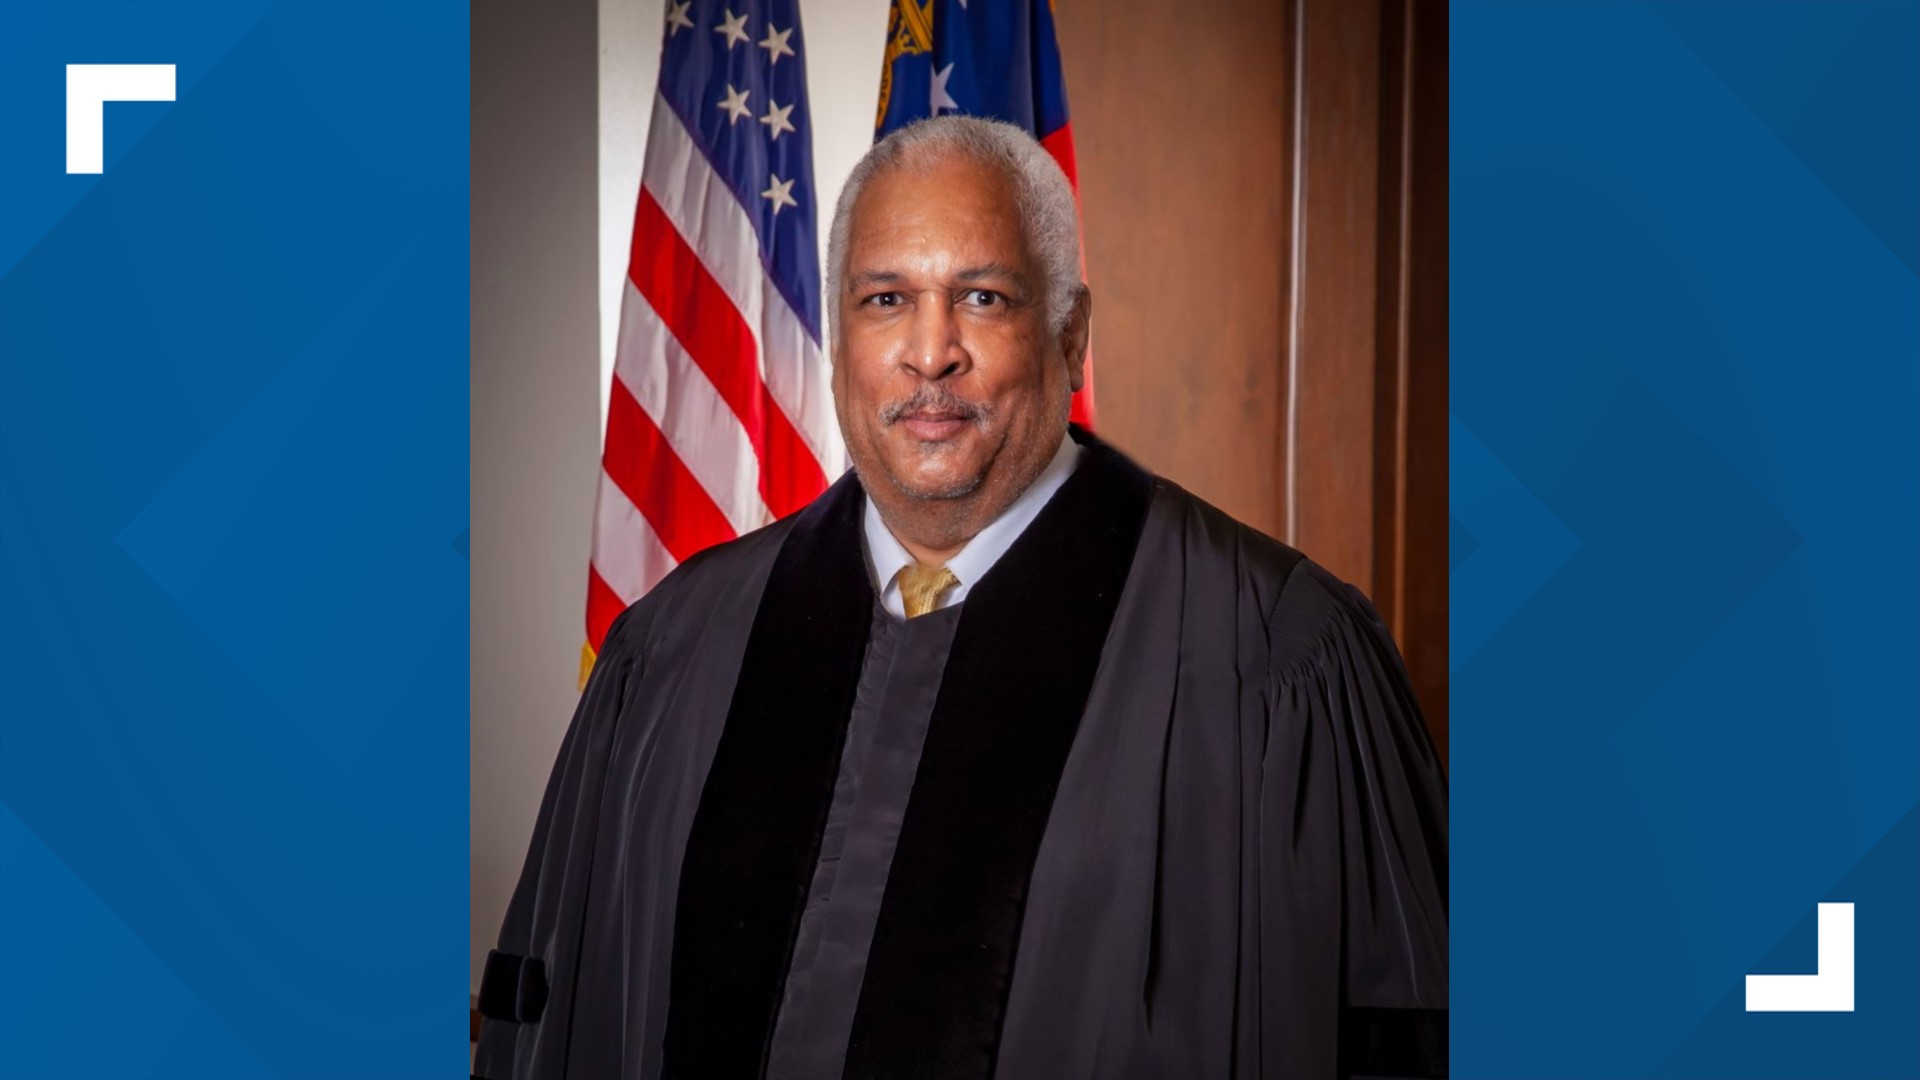 Judge Clyde Reese was described by Chief Judge Brian Rickman as "kind, gracious, hard-working and a gentleman in every sense of the word."